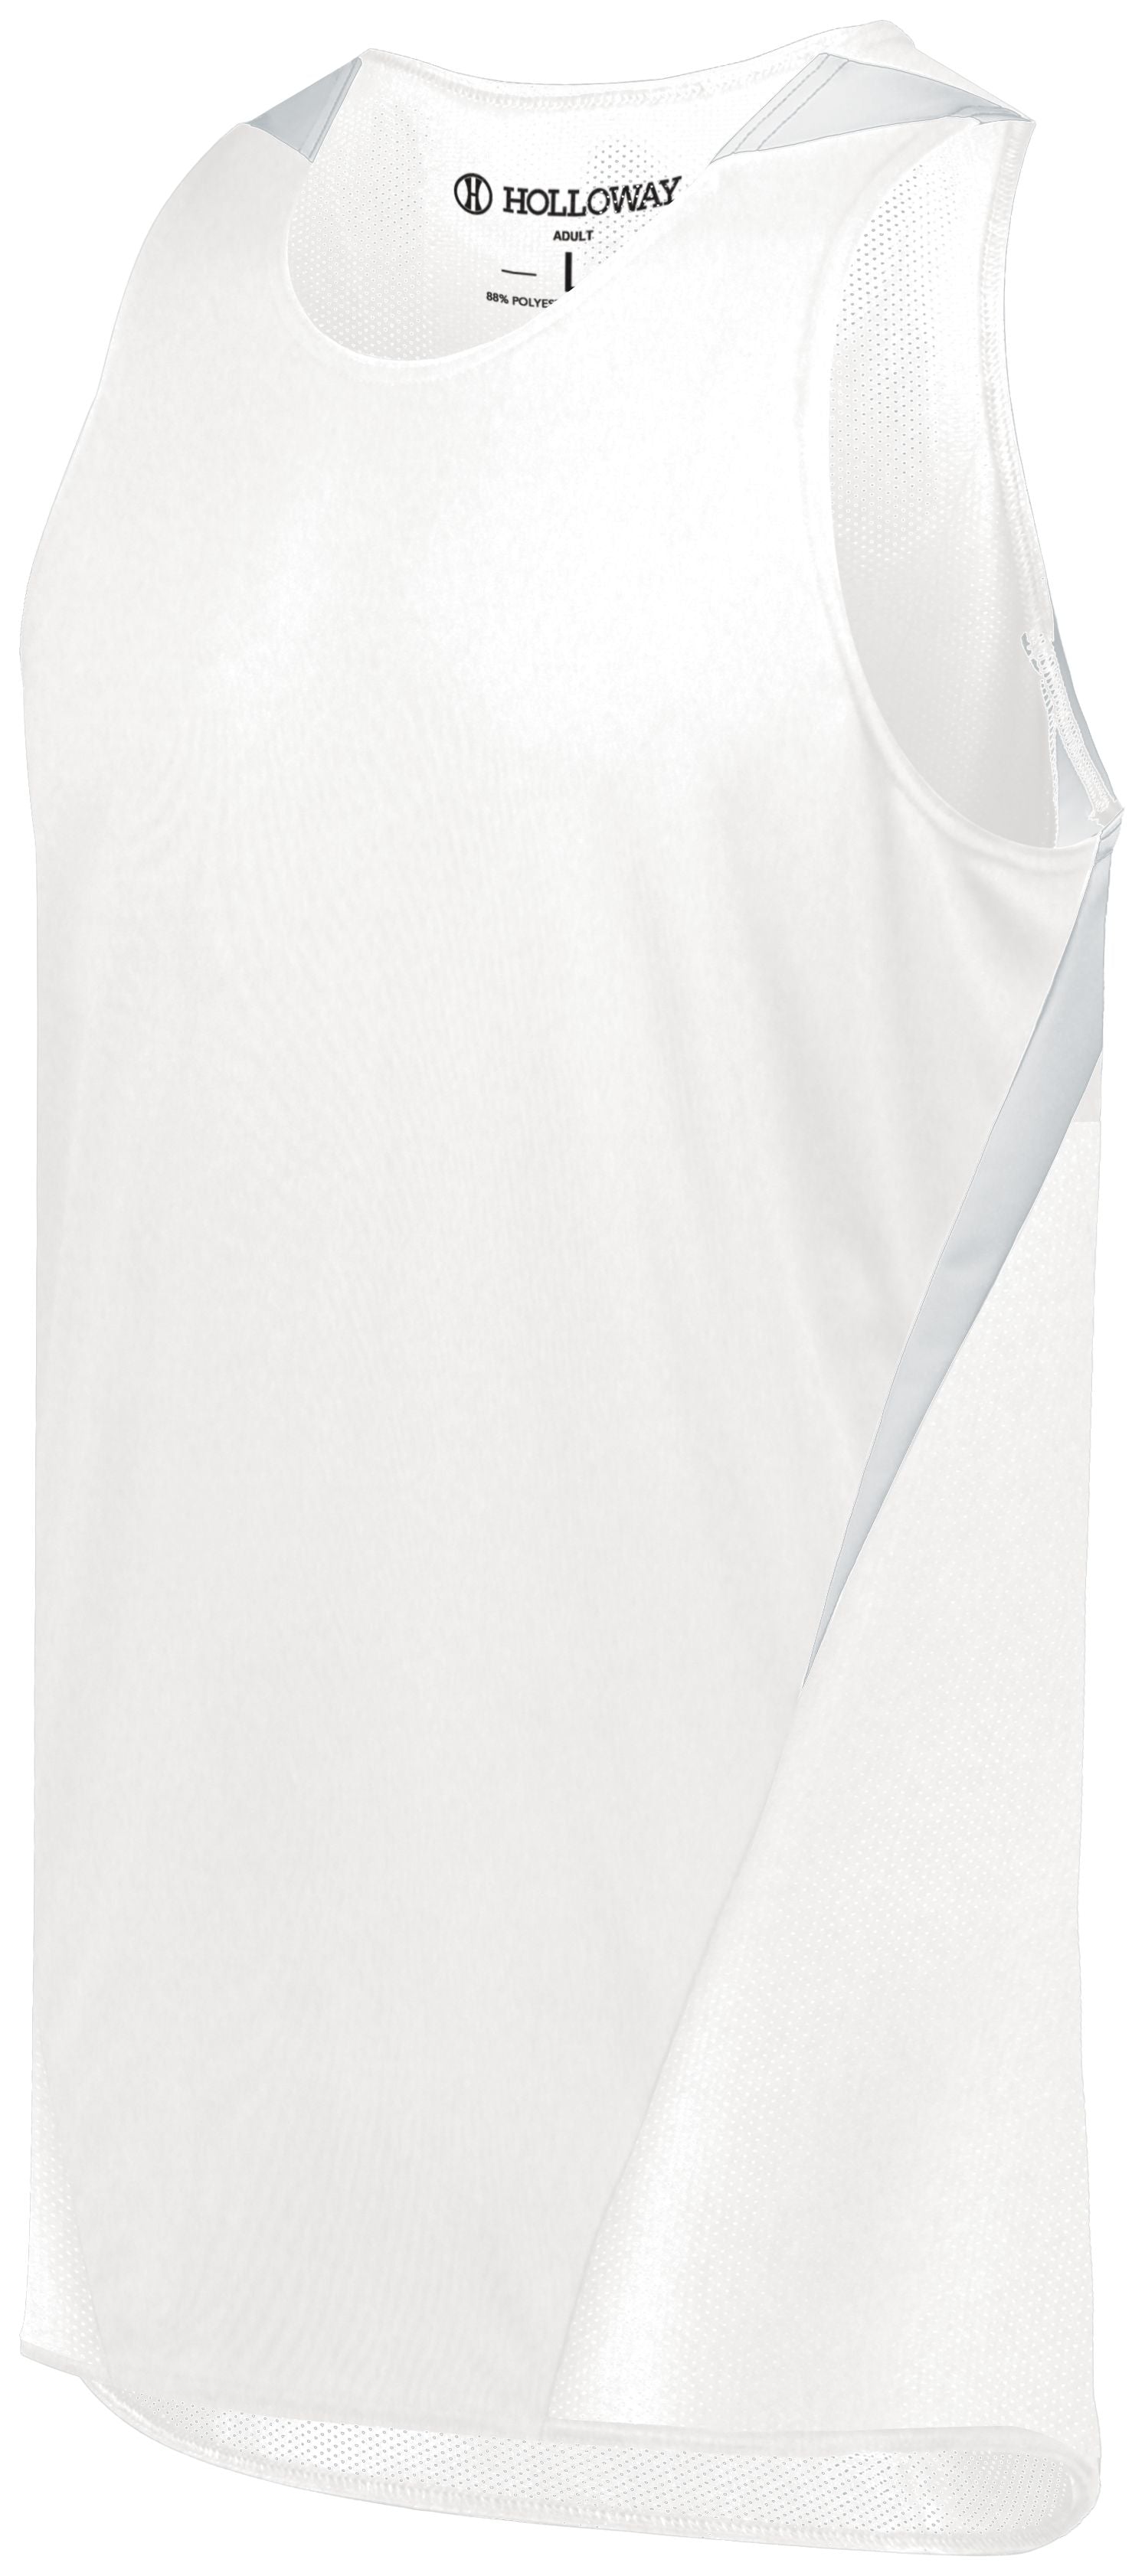 Holloway Pr Max Track Jersey in White/White  -Part of the Adult, Adult-Jersey, Track-Field, Holloway, Shirts product lines at KanaleyCreations.com